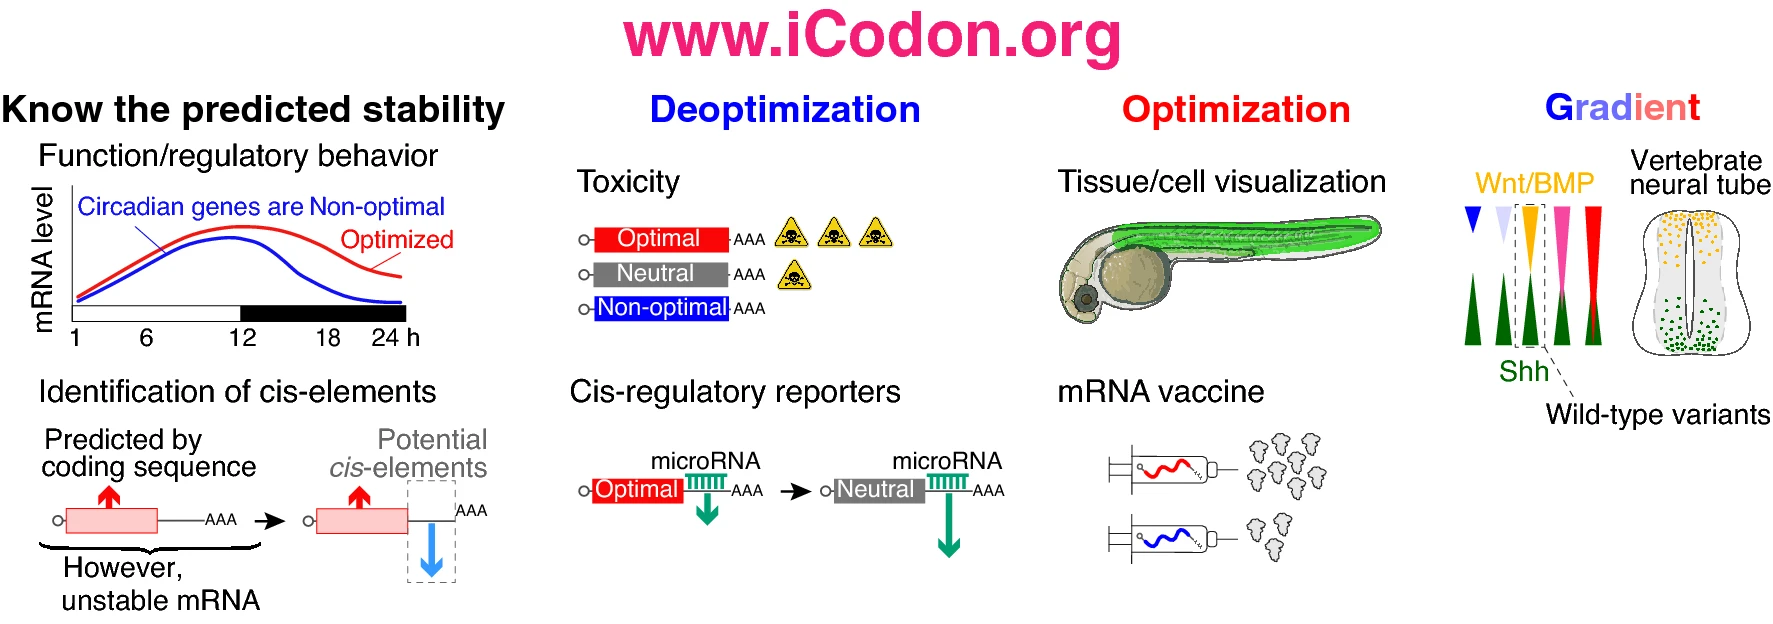 iCodon predicts gene expression based on the codon composition and designs new variants based on synonymous mutations.